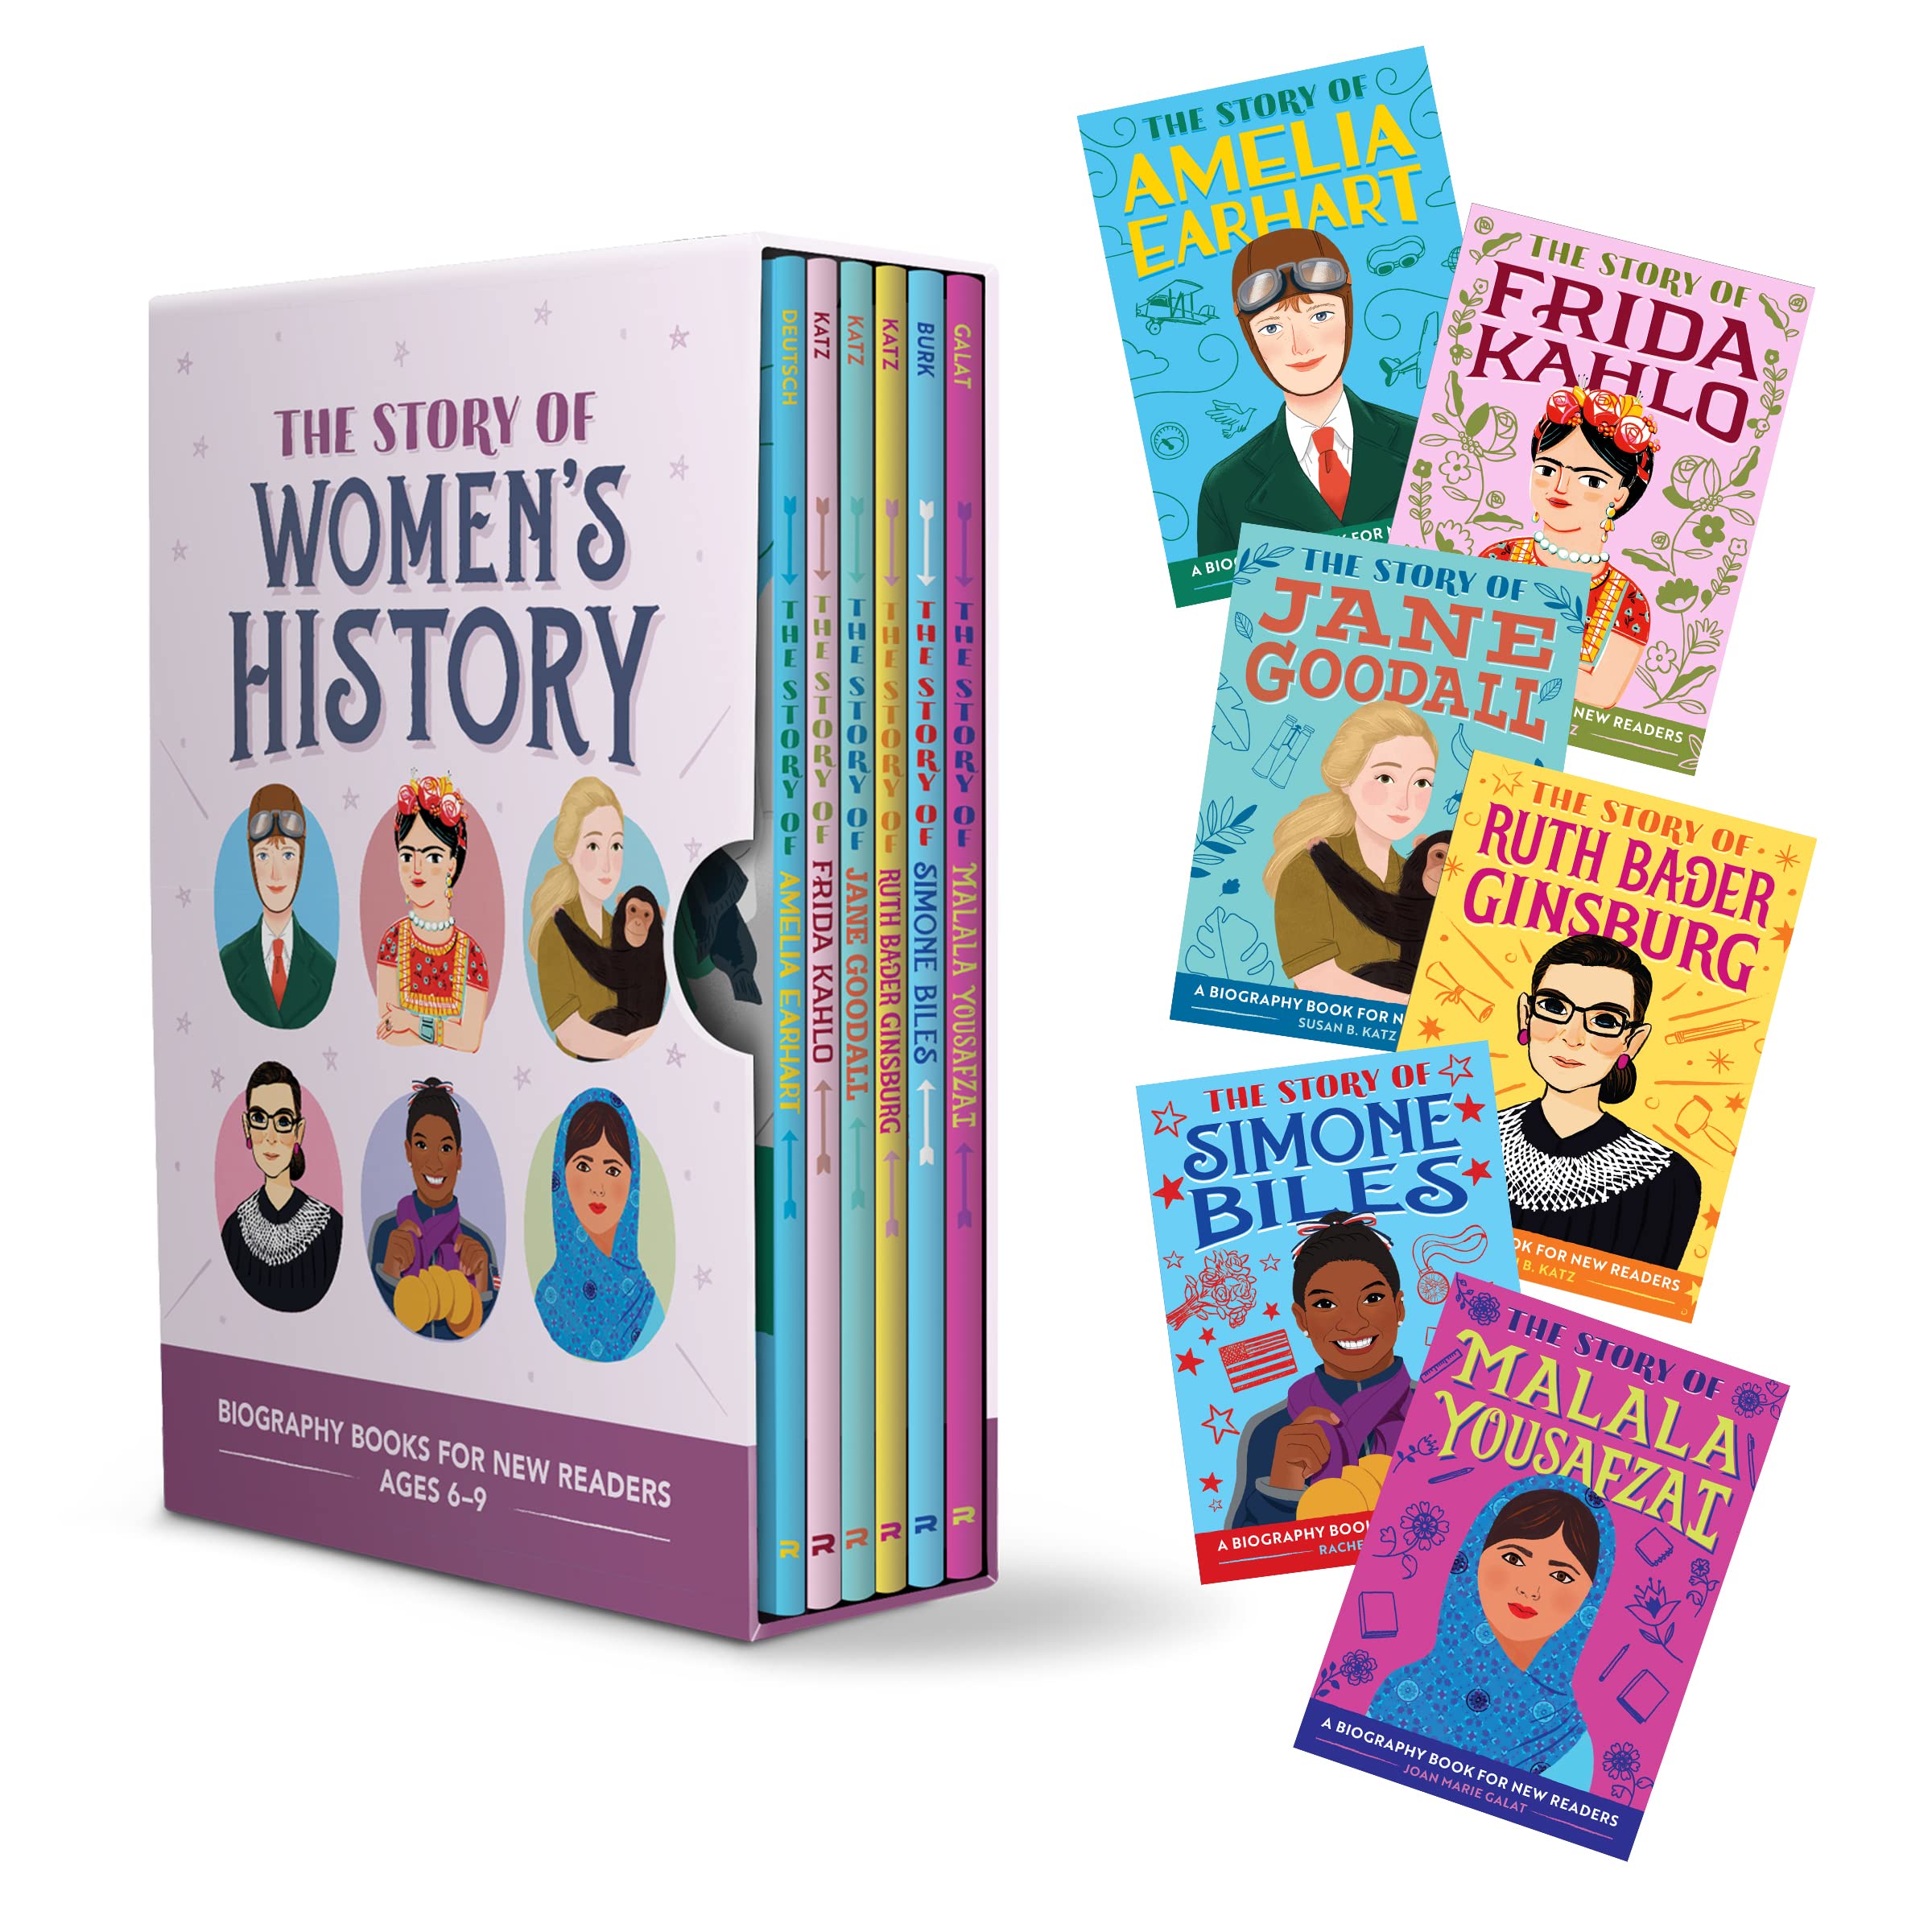 The Story of Women's History Box Set: Biography Books for New Readers Ages 6-9 (The Story Of: A Biography Series for New Readers)